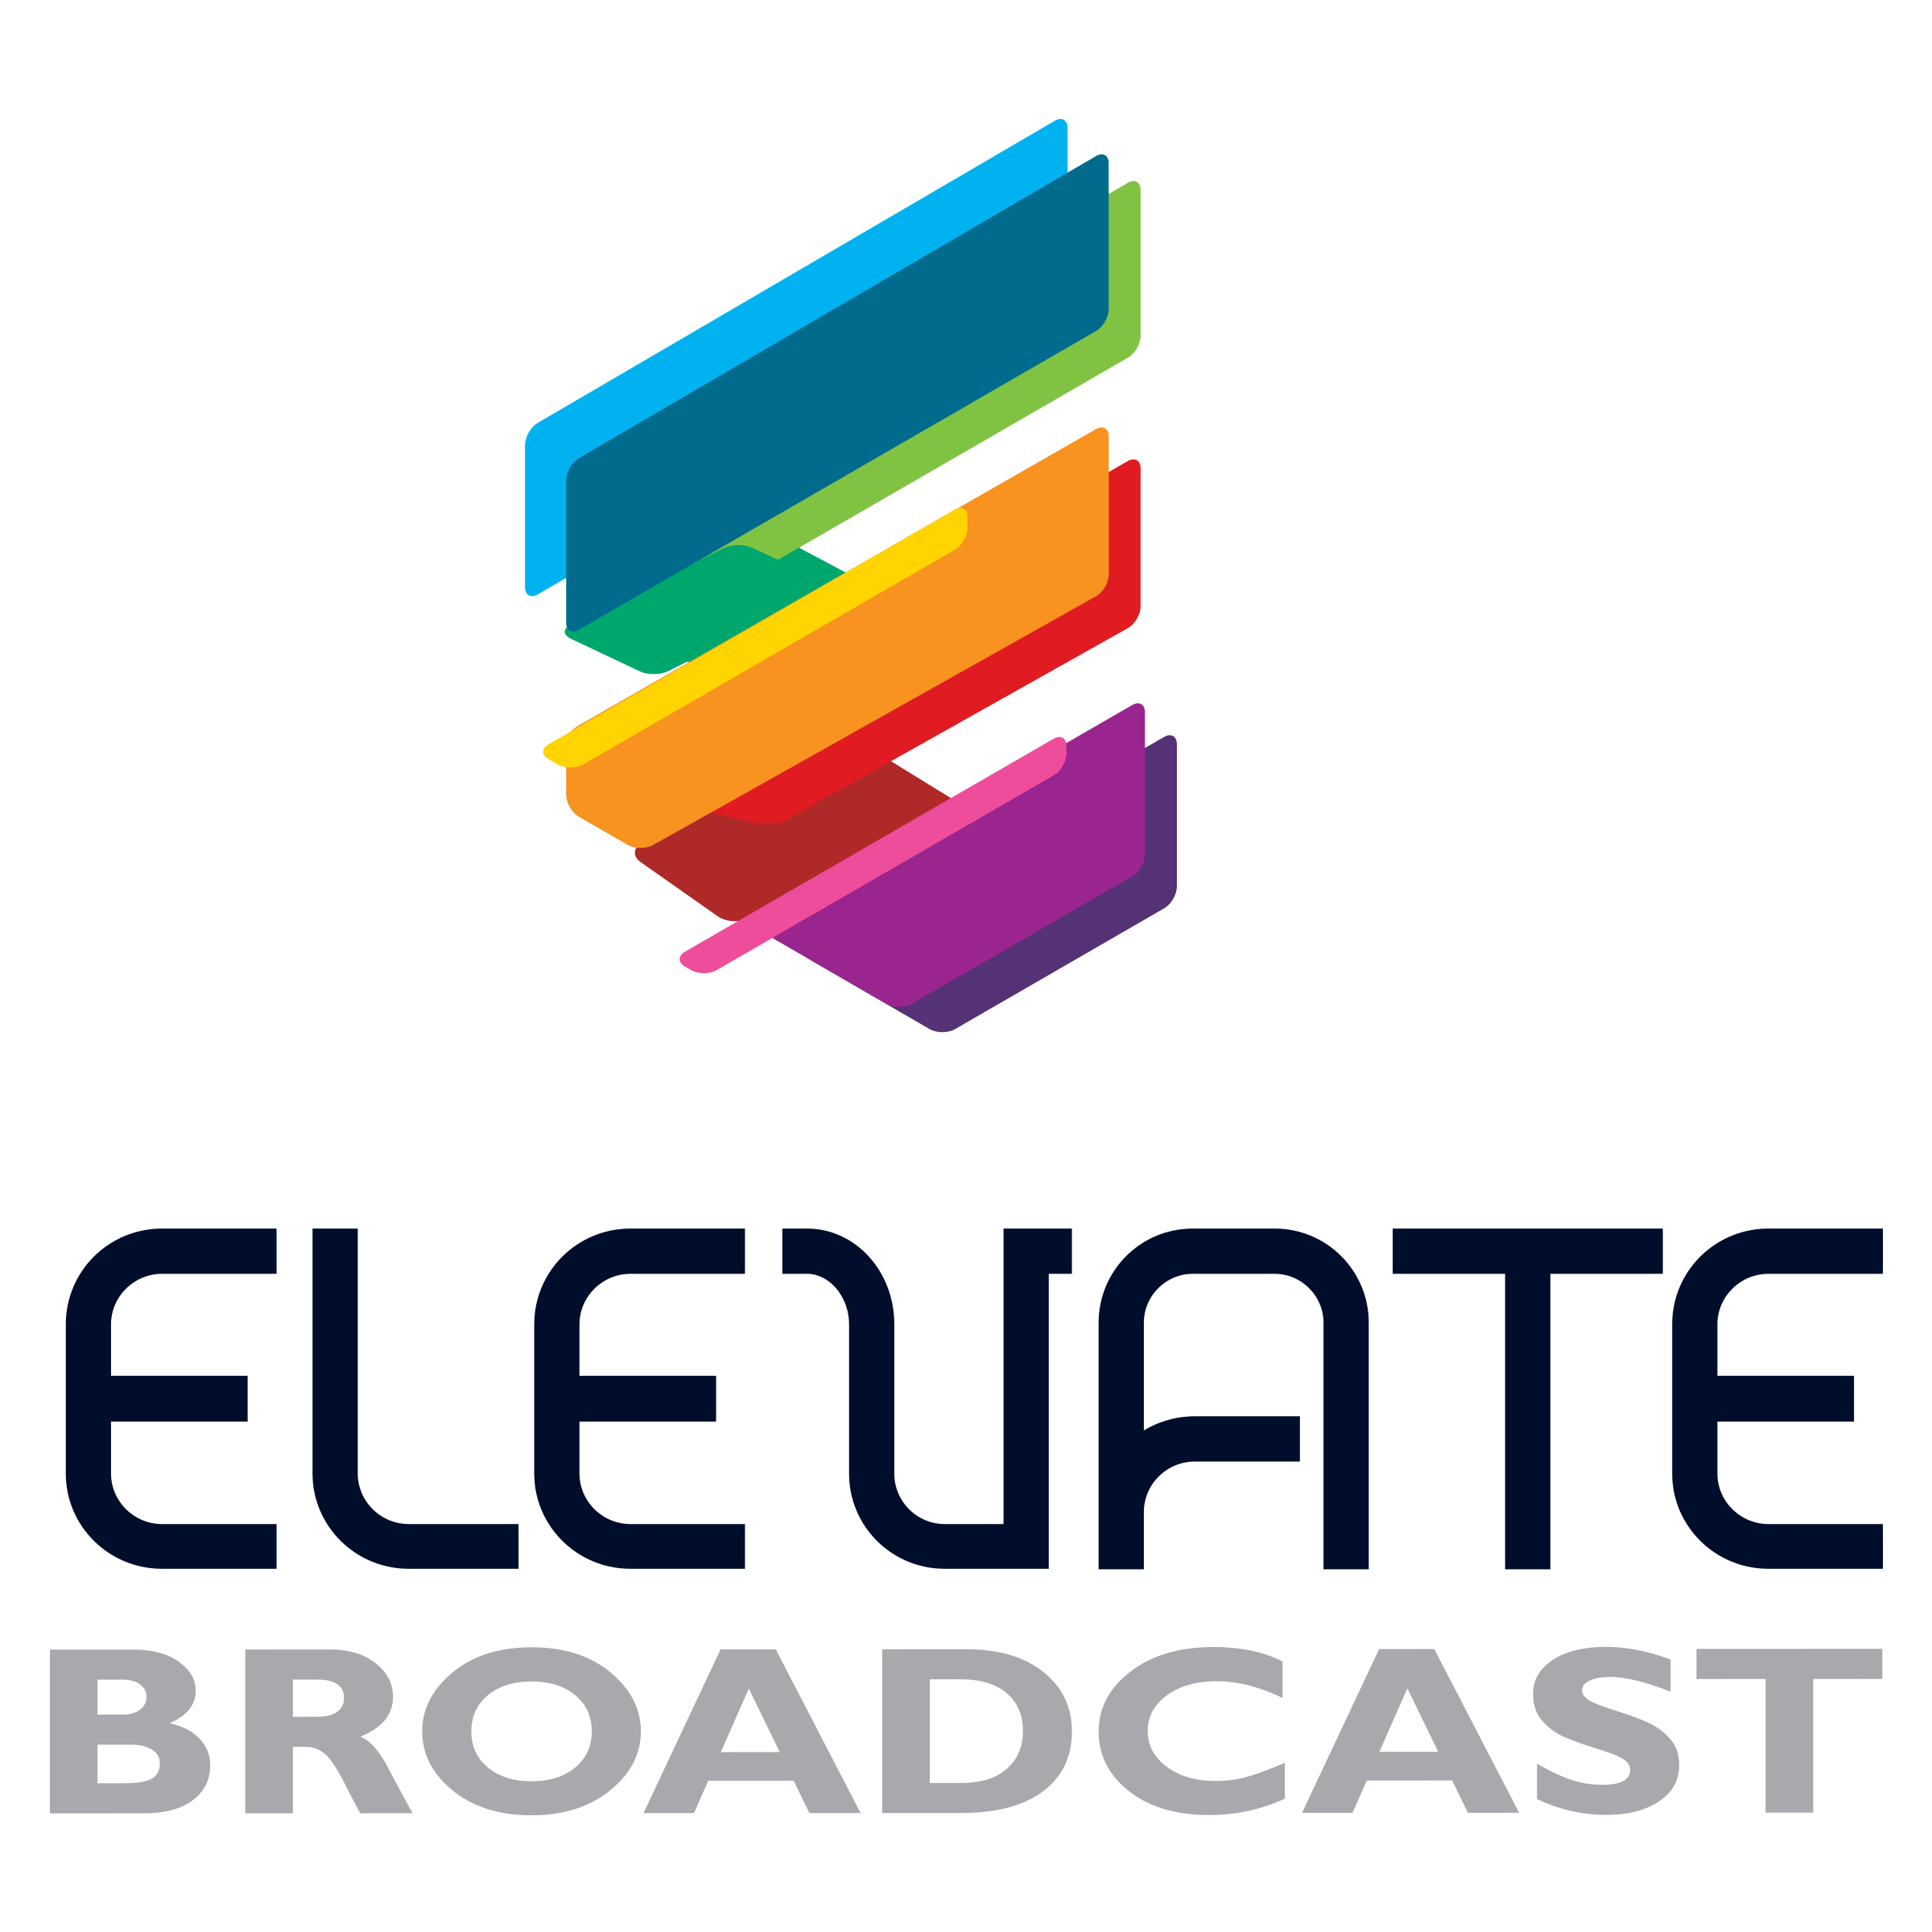 Broadcast Logo - Elevate Broadcast. Consulting, Product Supply & System Integration